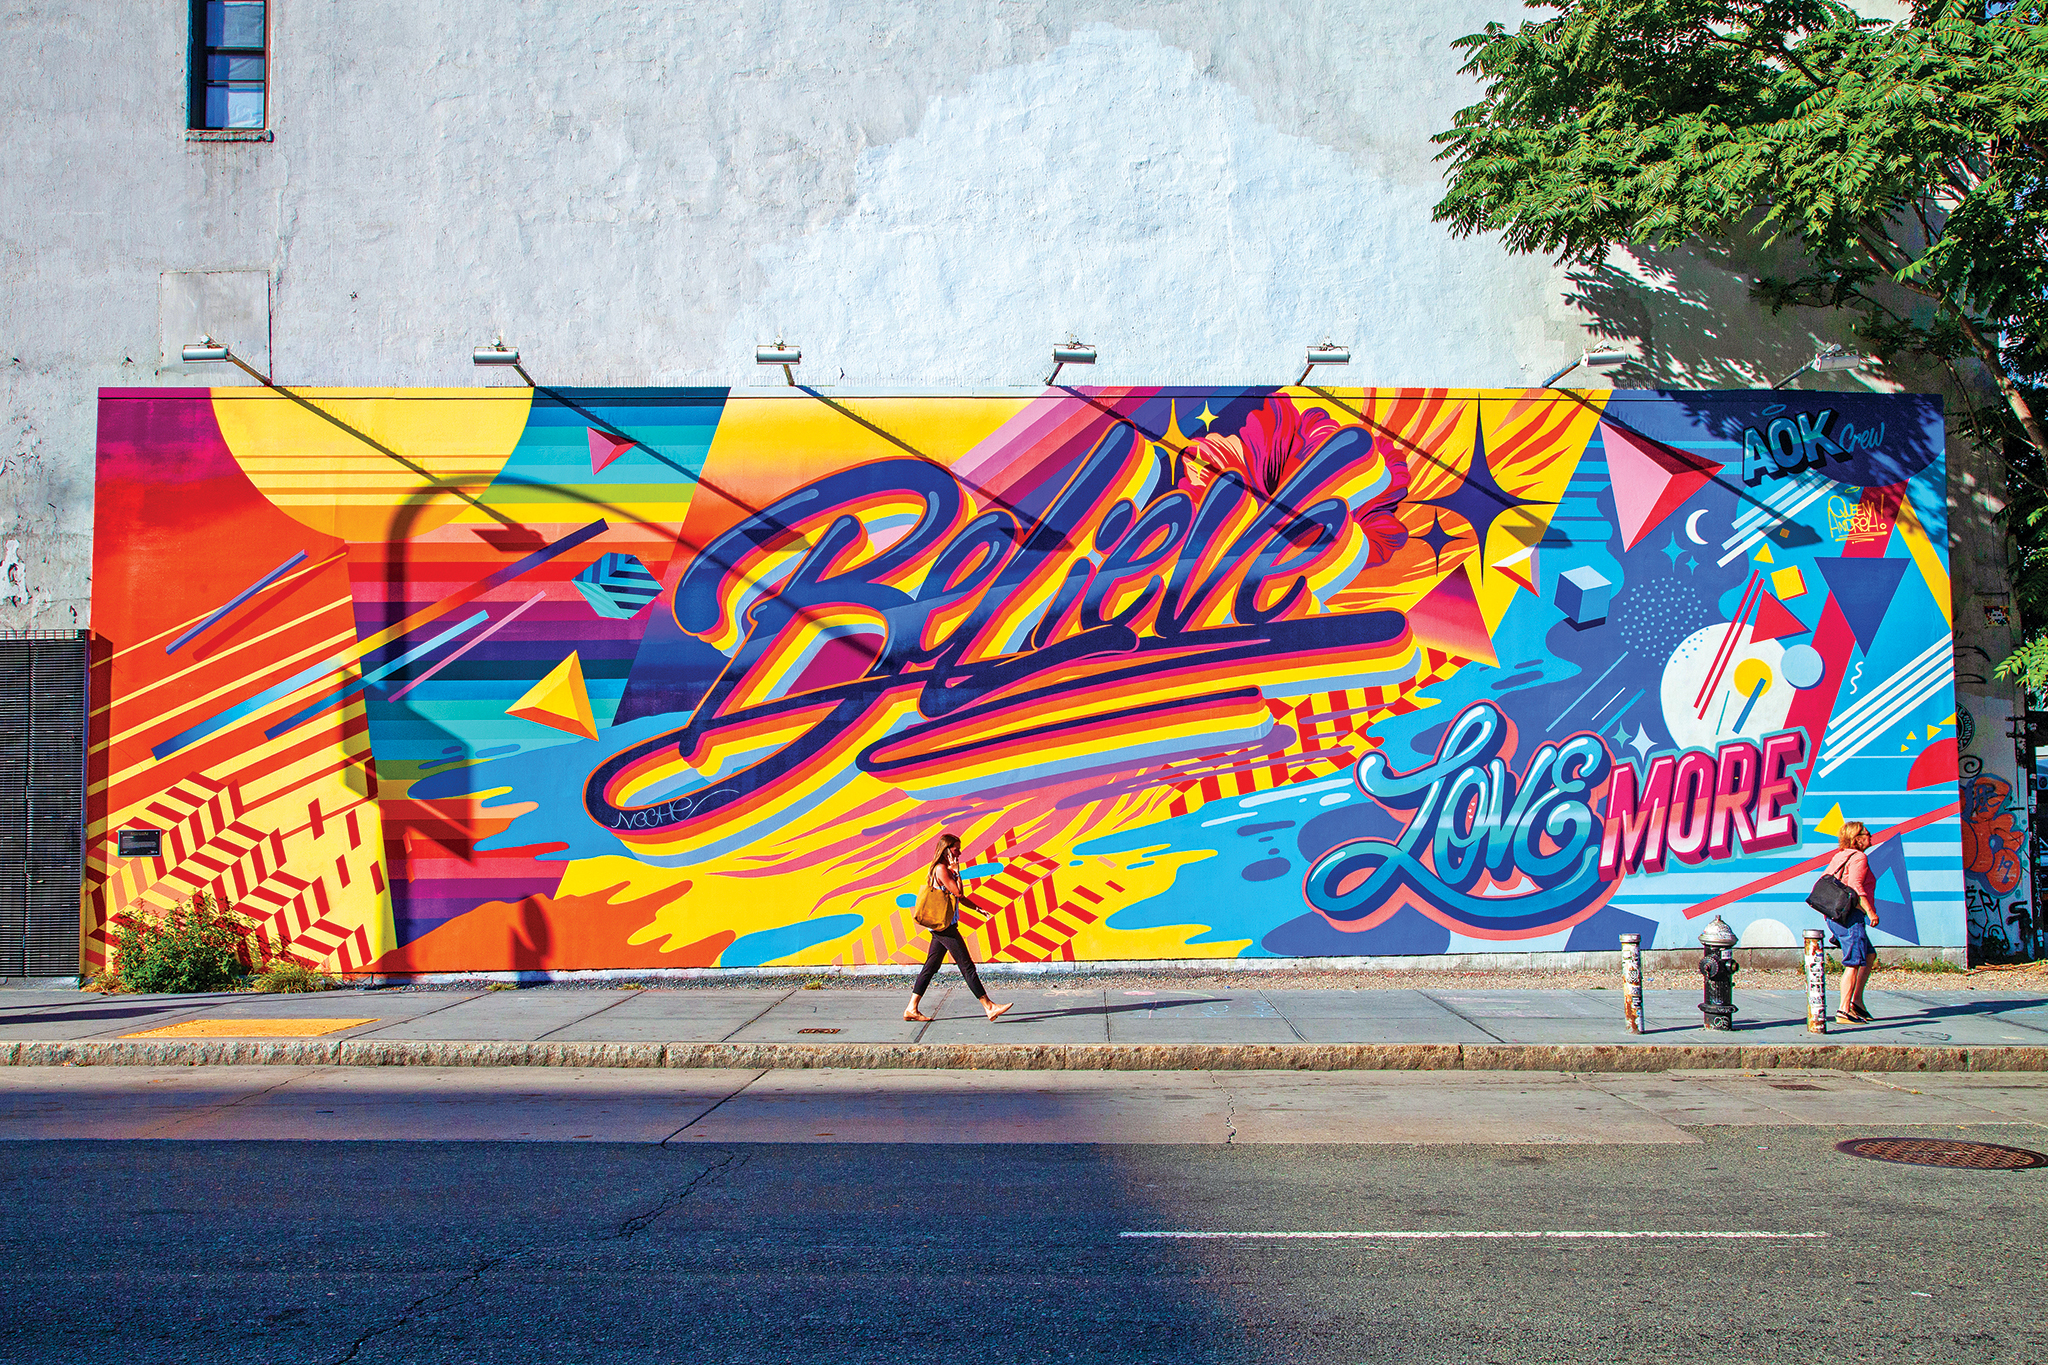 NYC's is the street art capital of America, this report says